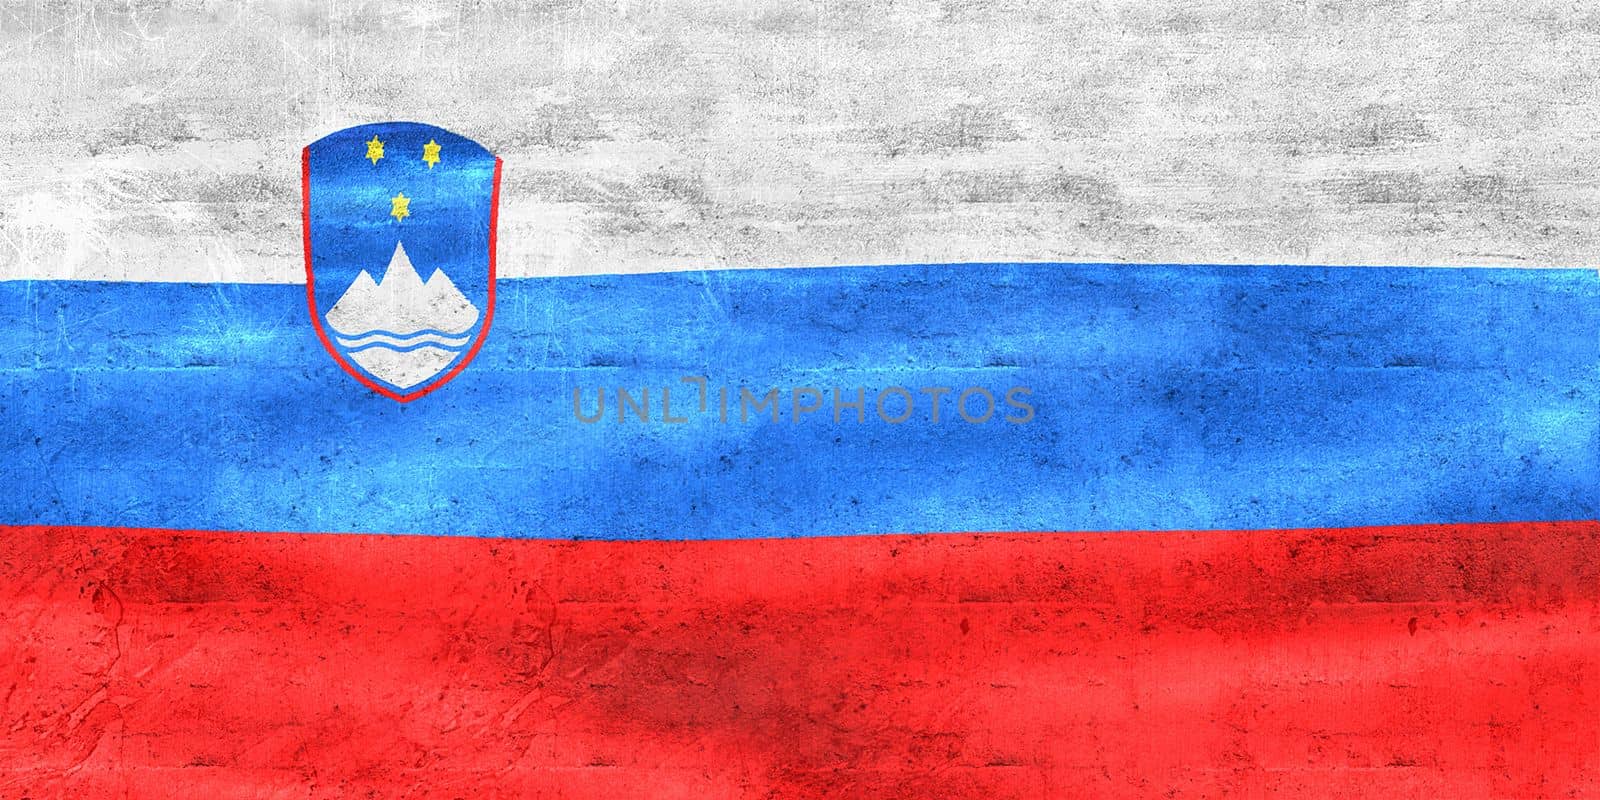 3D-Illustration of a Slovenia flag - realistic waving fabric flag by MP_foto71